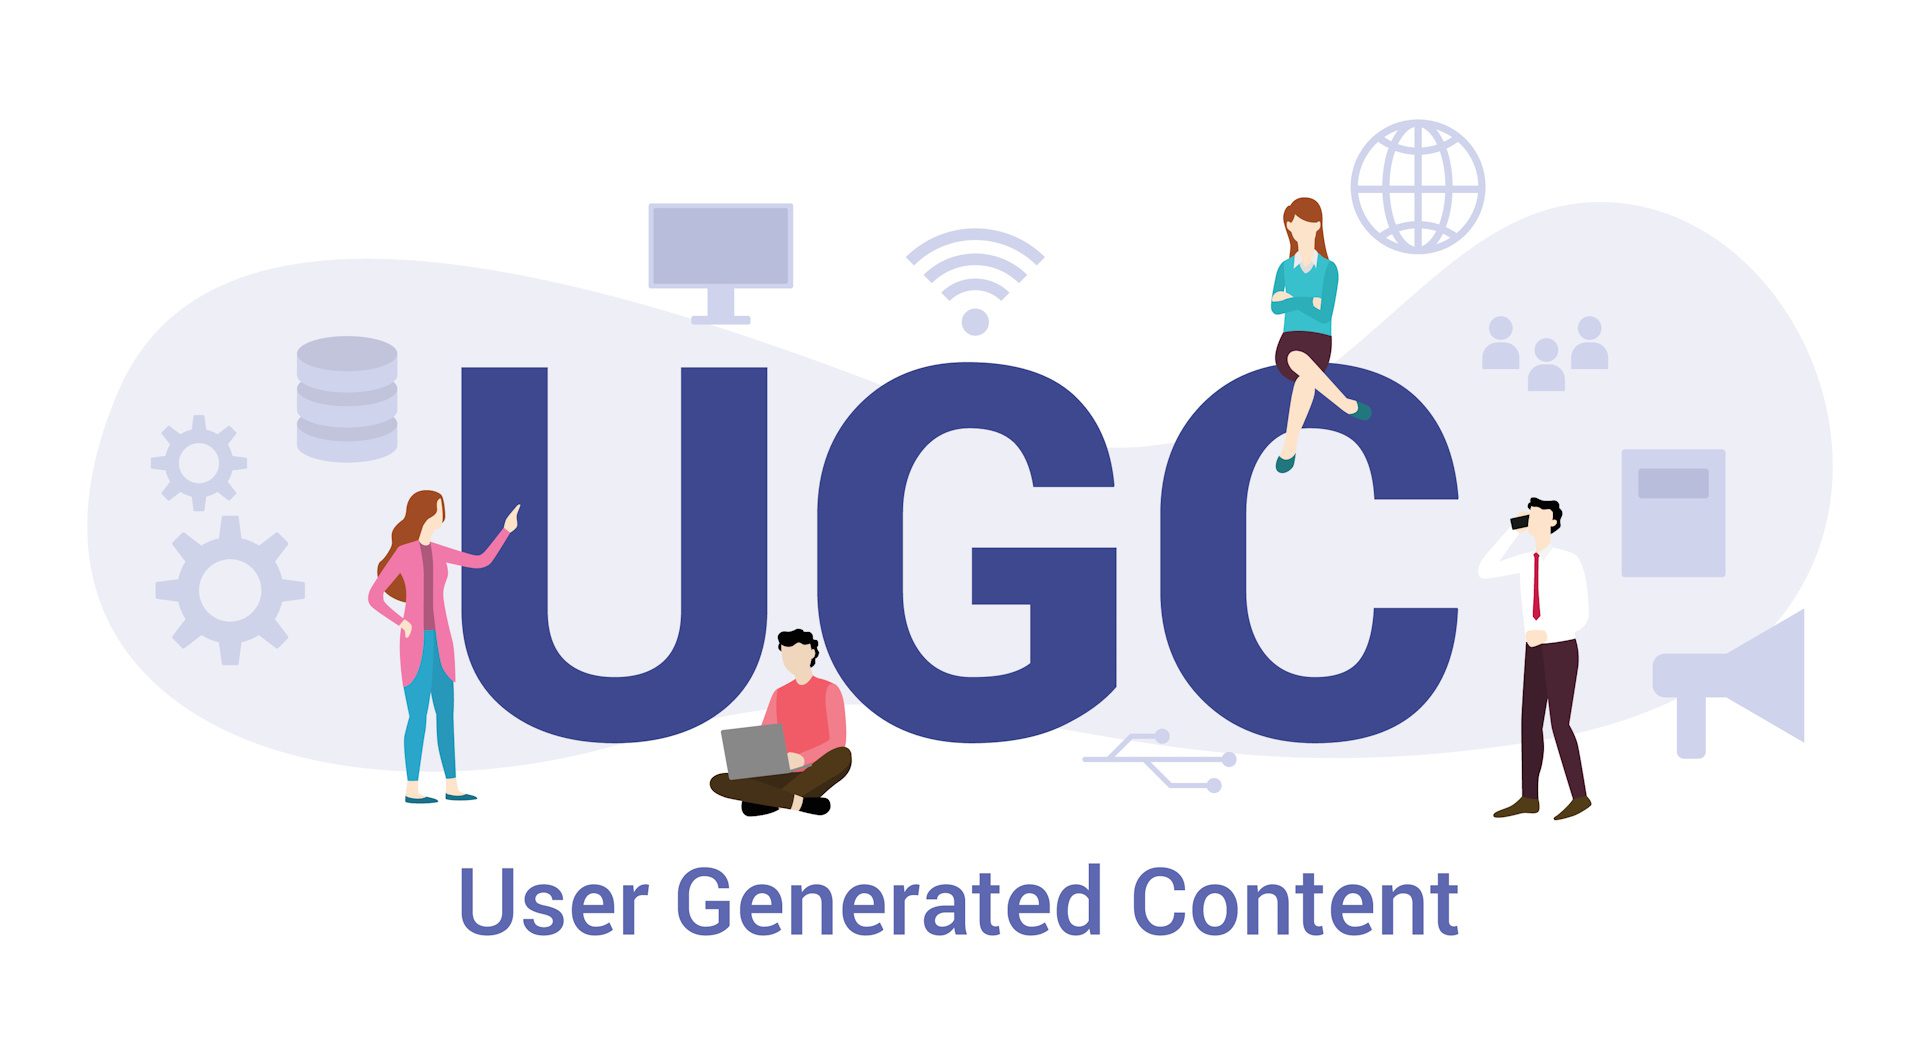 How To Make User-Generated Content Work For Your Brand